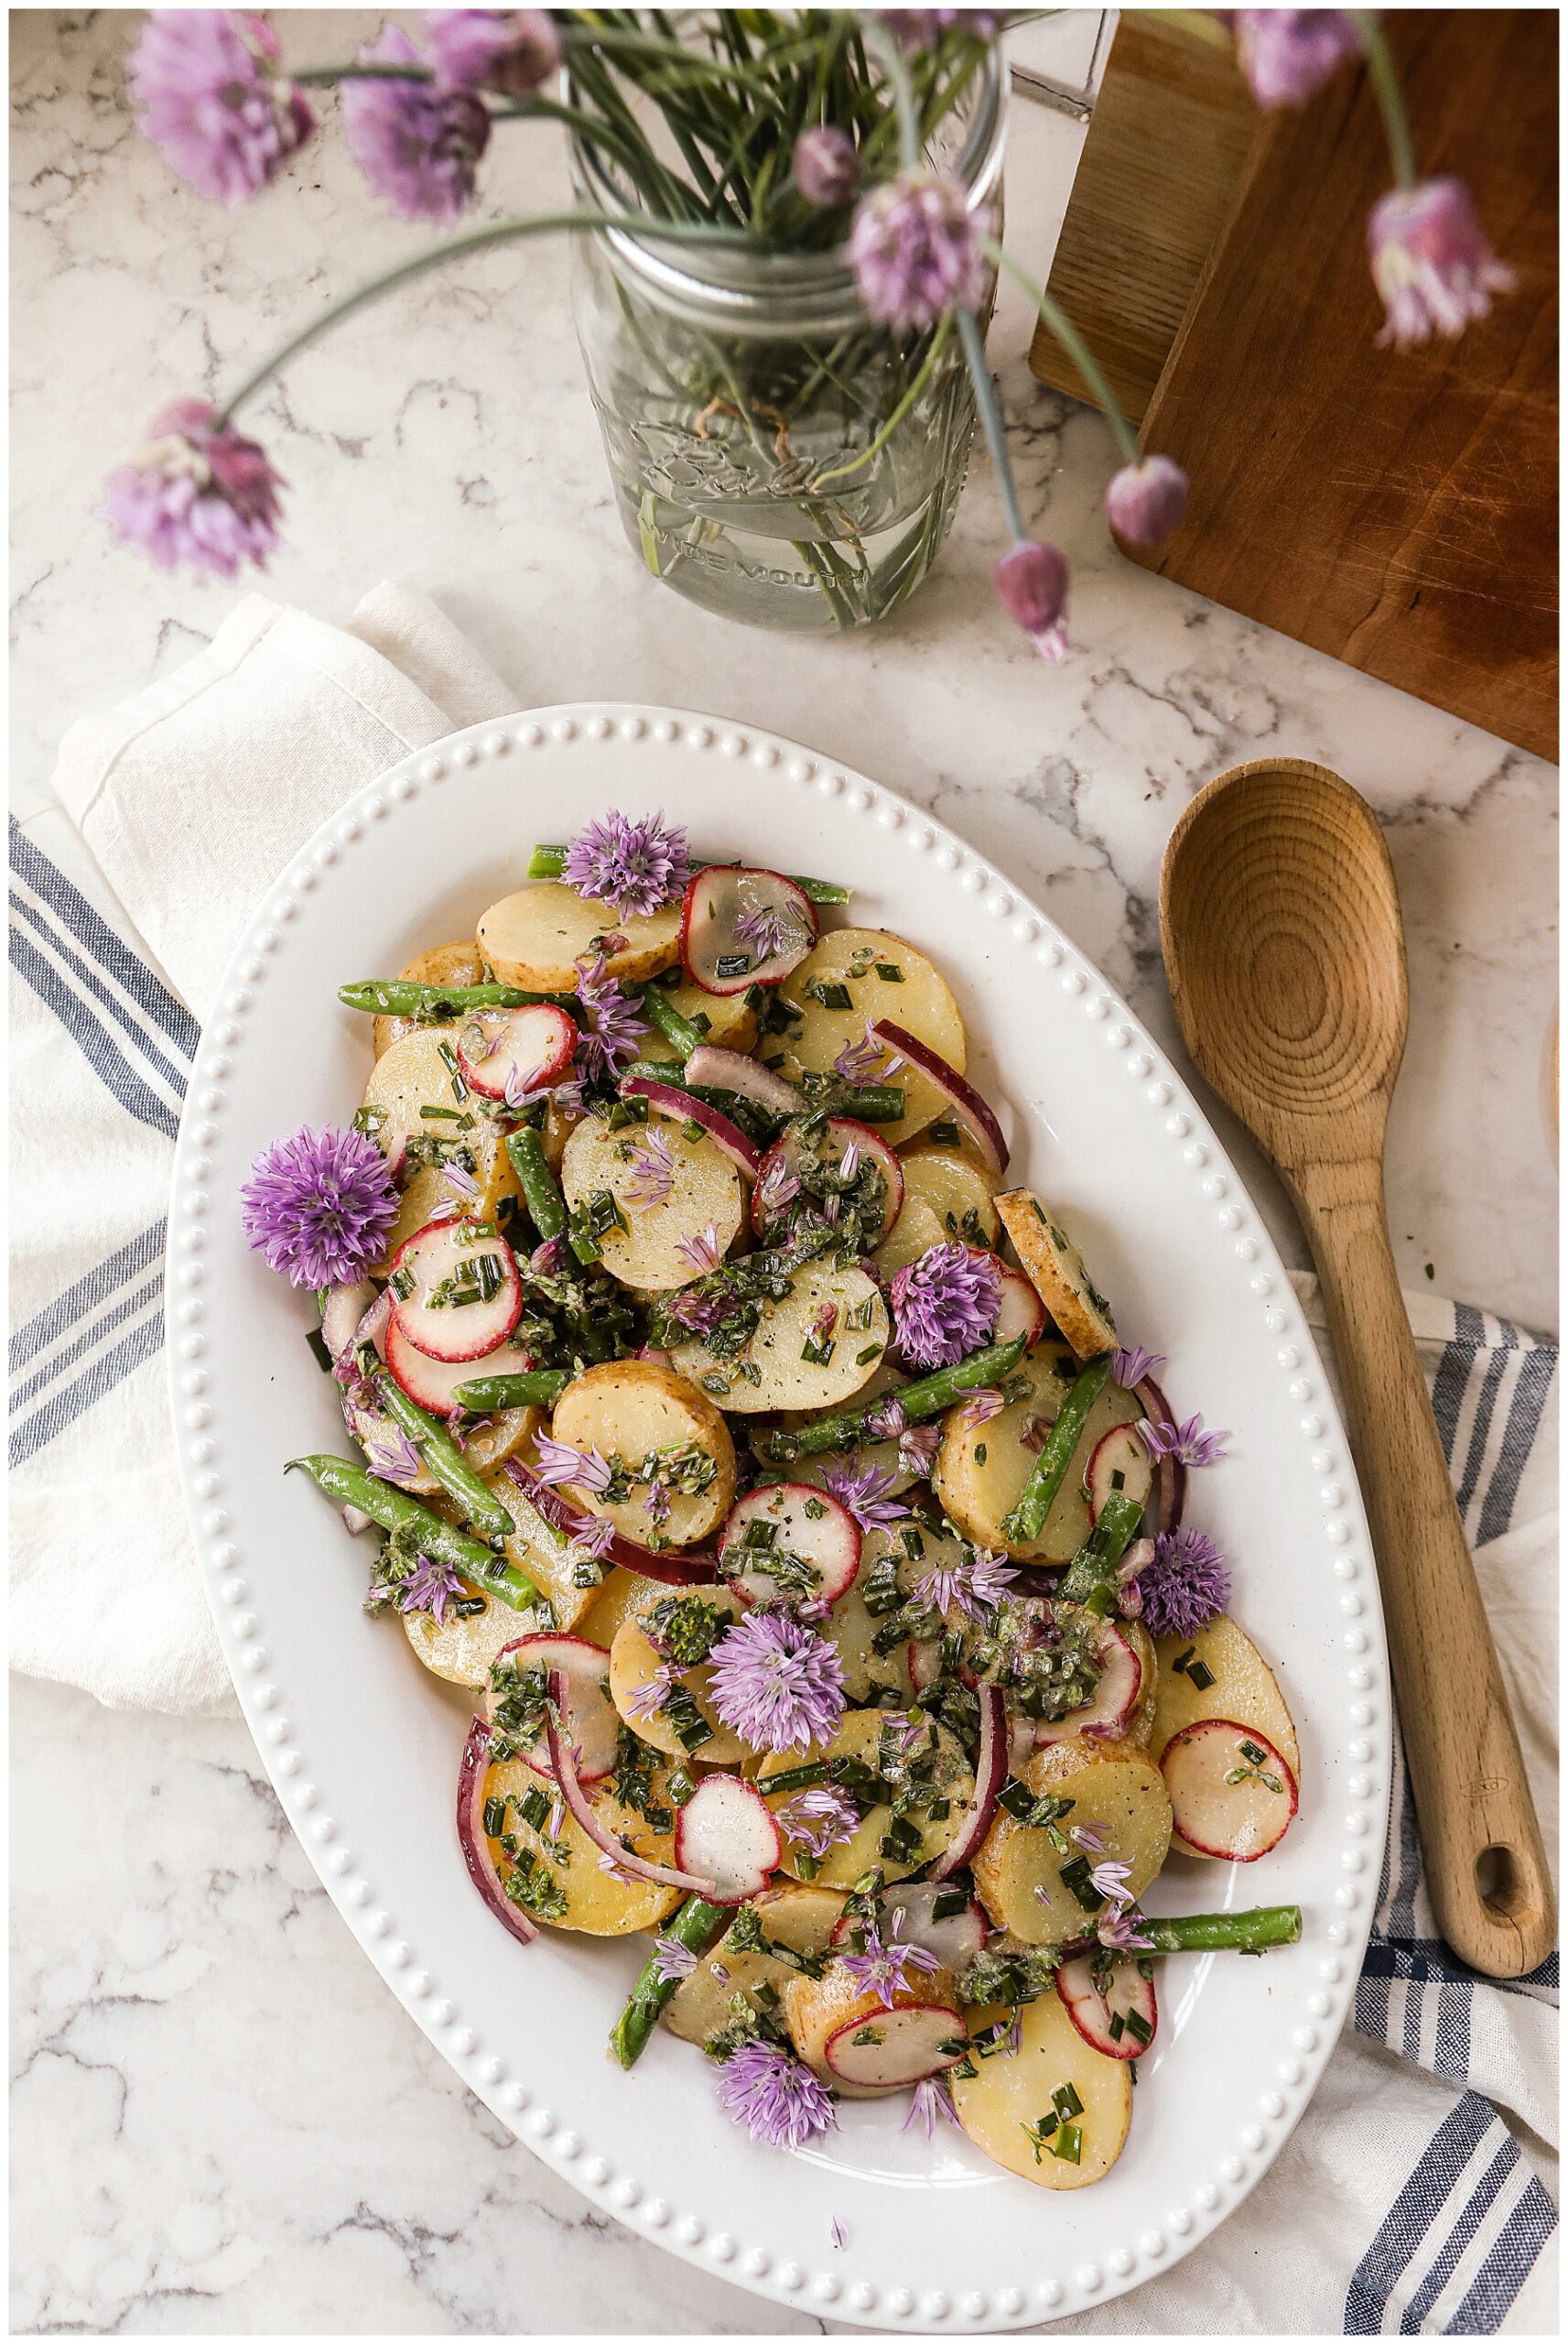 Recipe for French Potato Salad with Chive blossoms